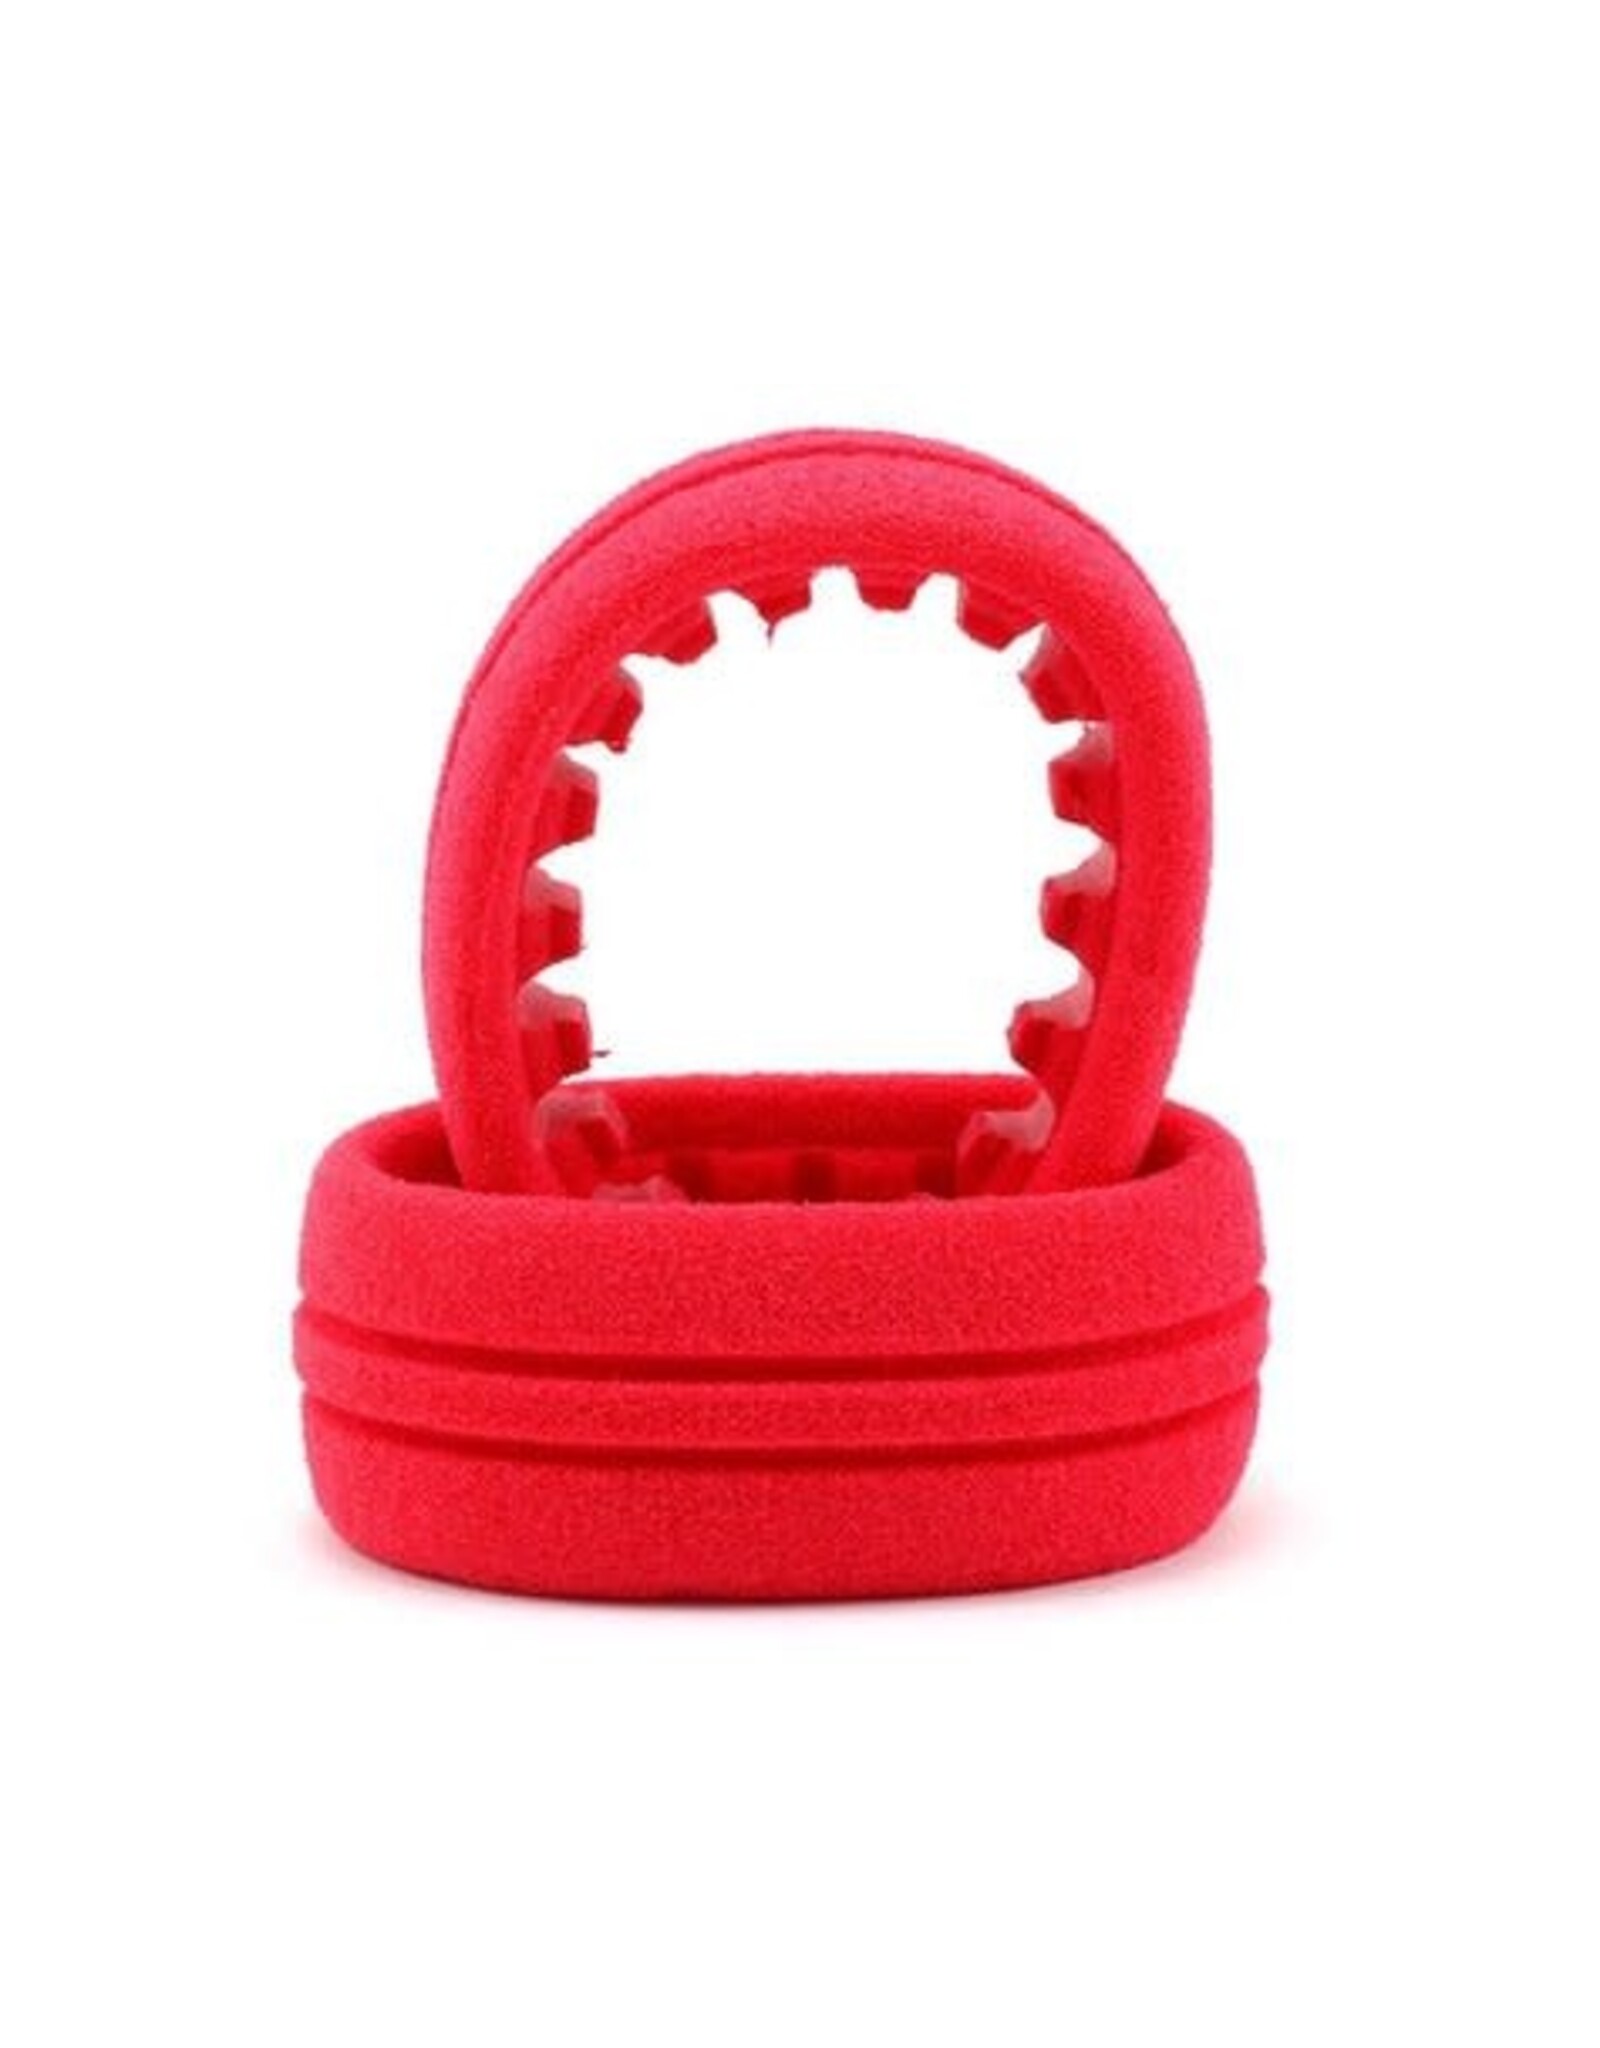 Aka 1:10 Buggy 4WD Frnt Closed Cell Insrt Soft Red (2)